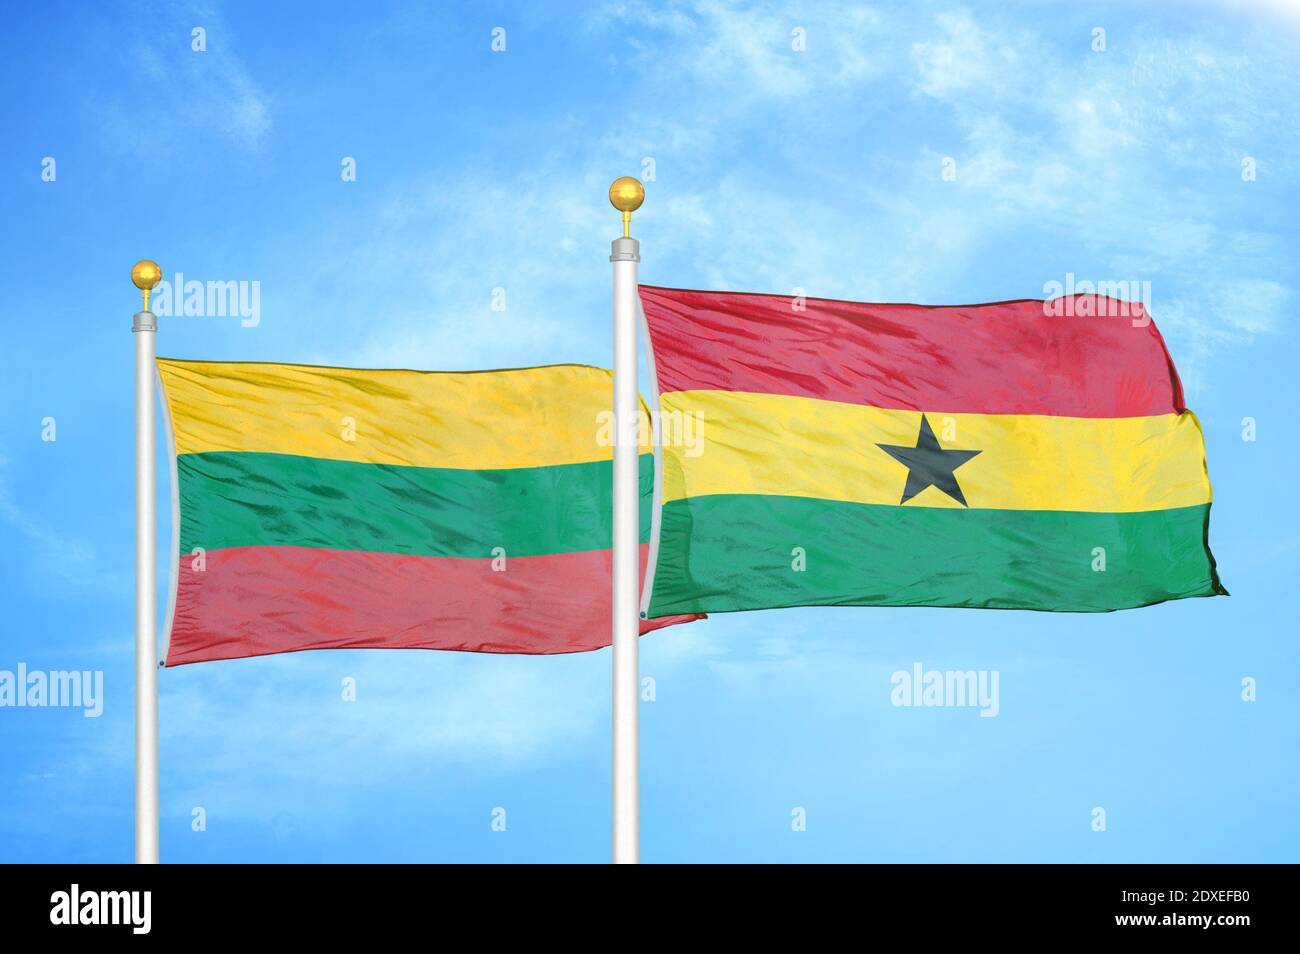 Lithuania and Ghana two flags on flagpoles and blue sky Stock Photo